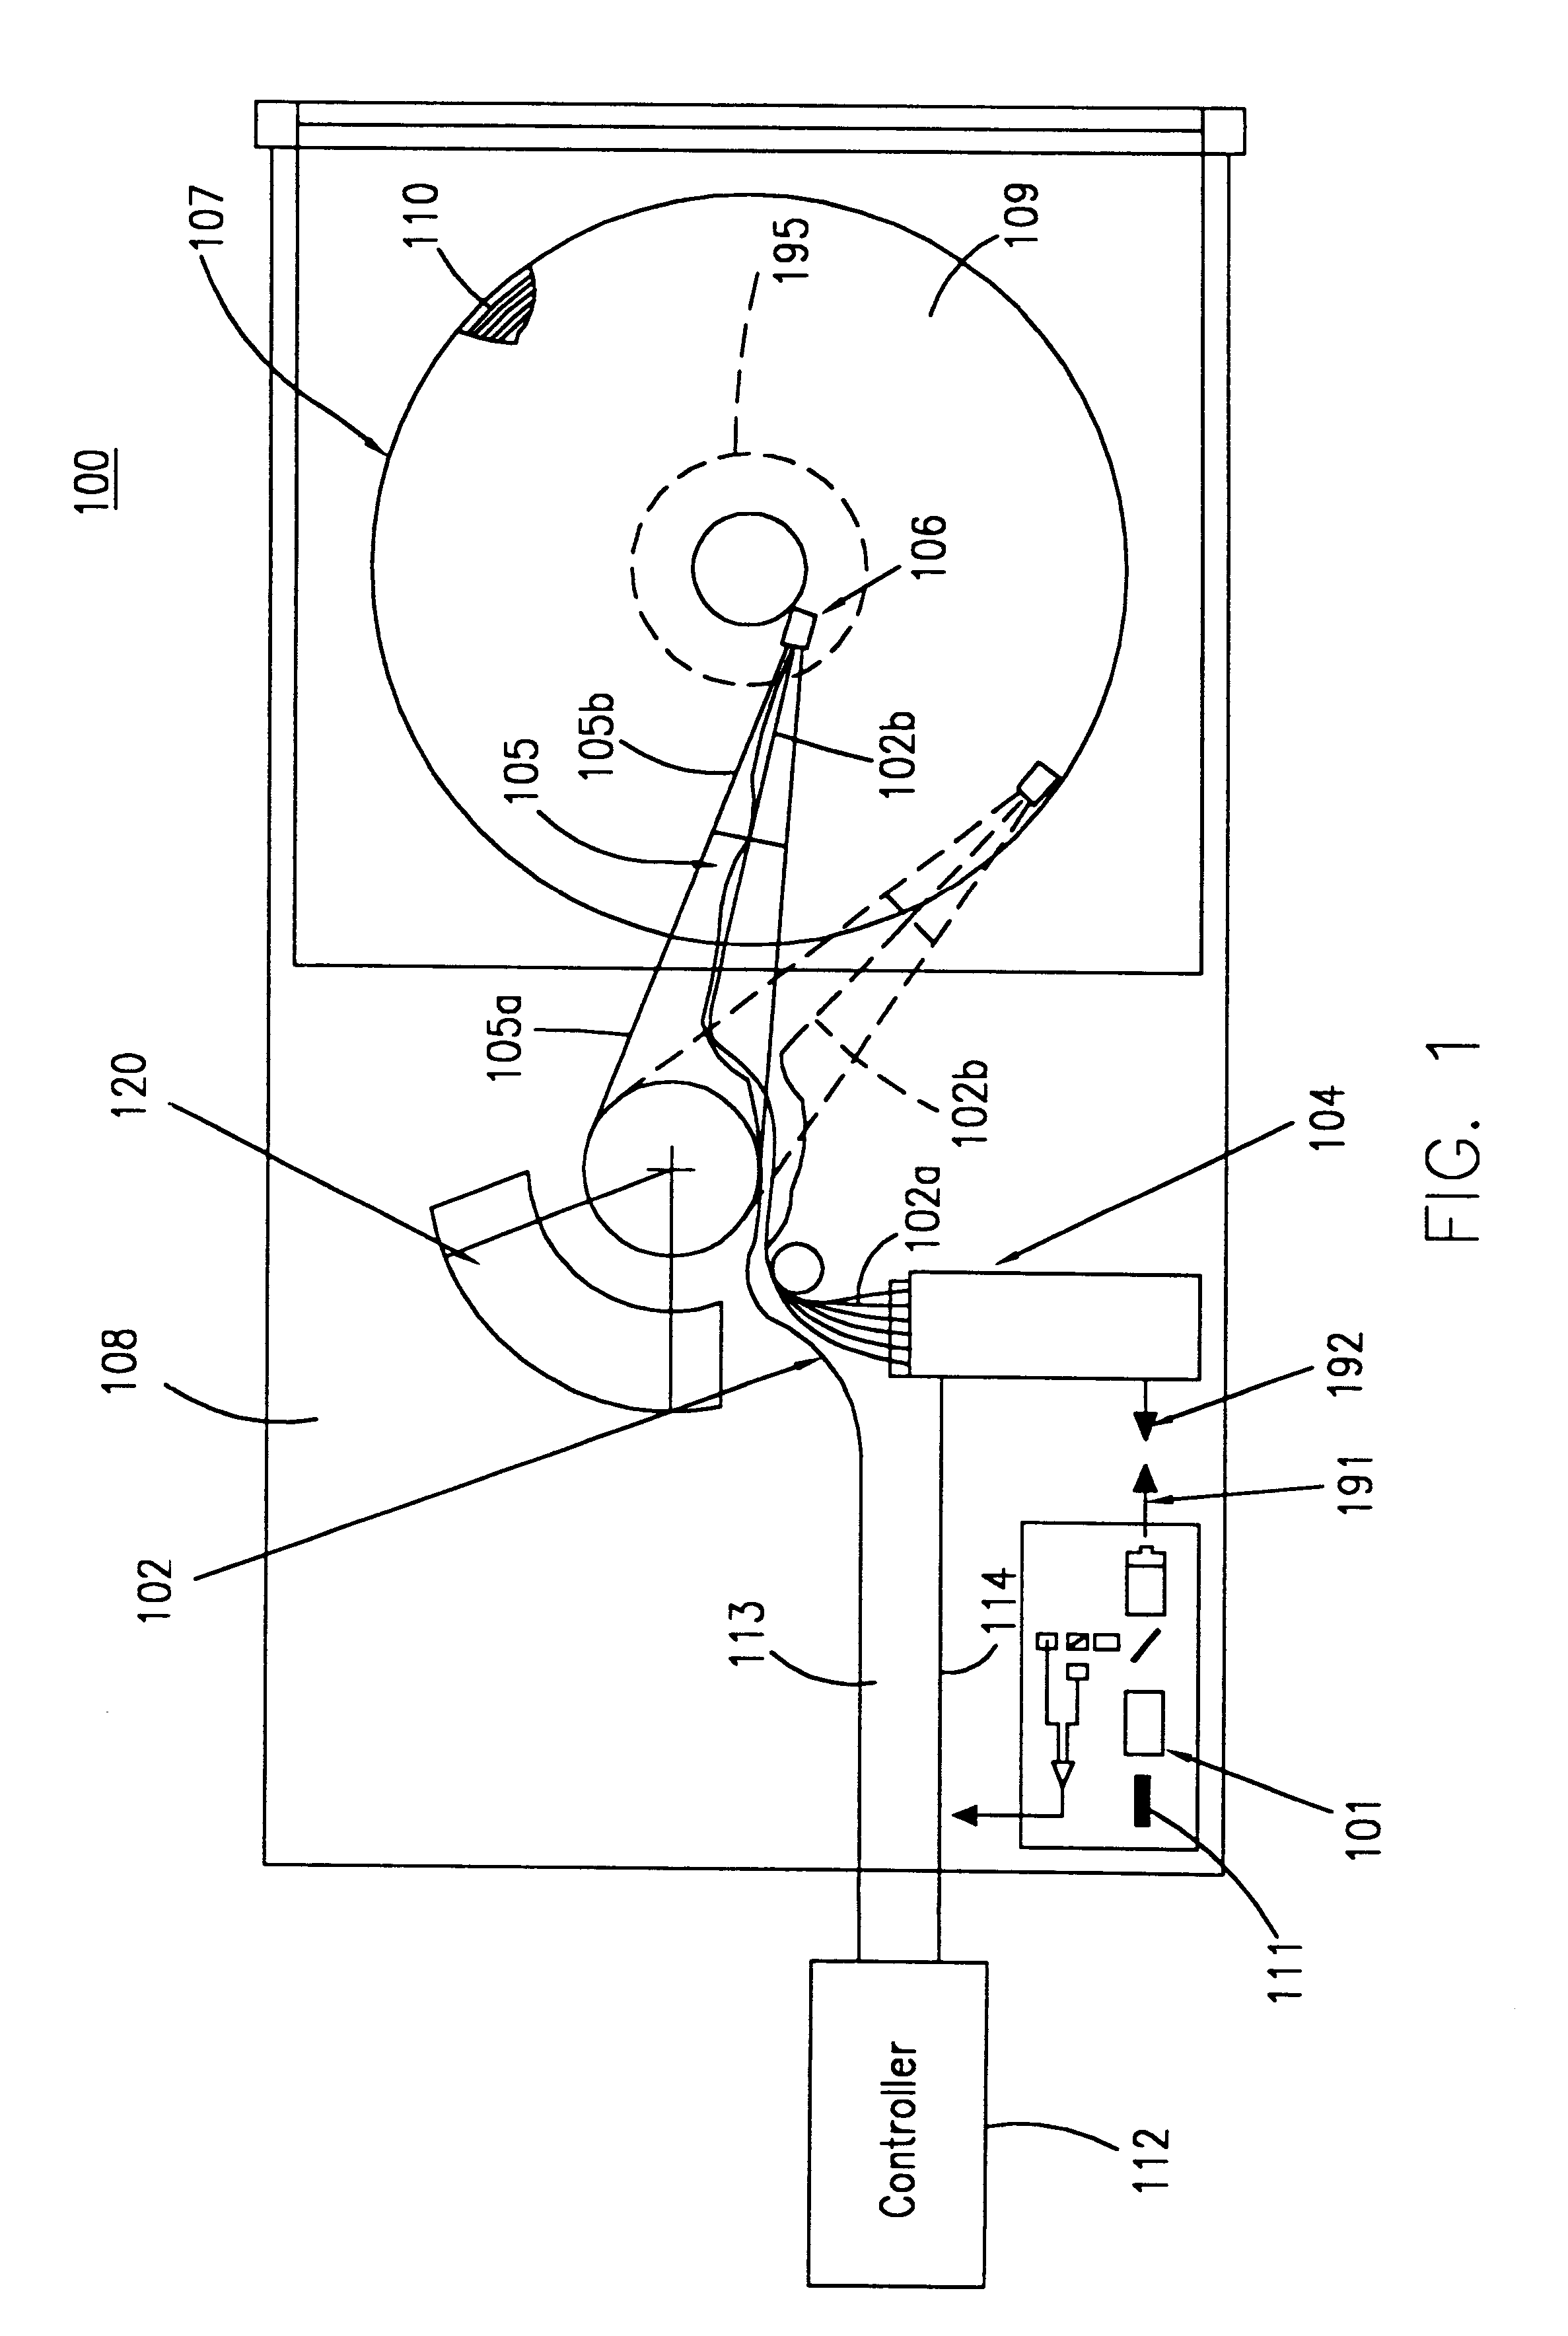 Method for processing a plurality of micro-machined mirror assemblies